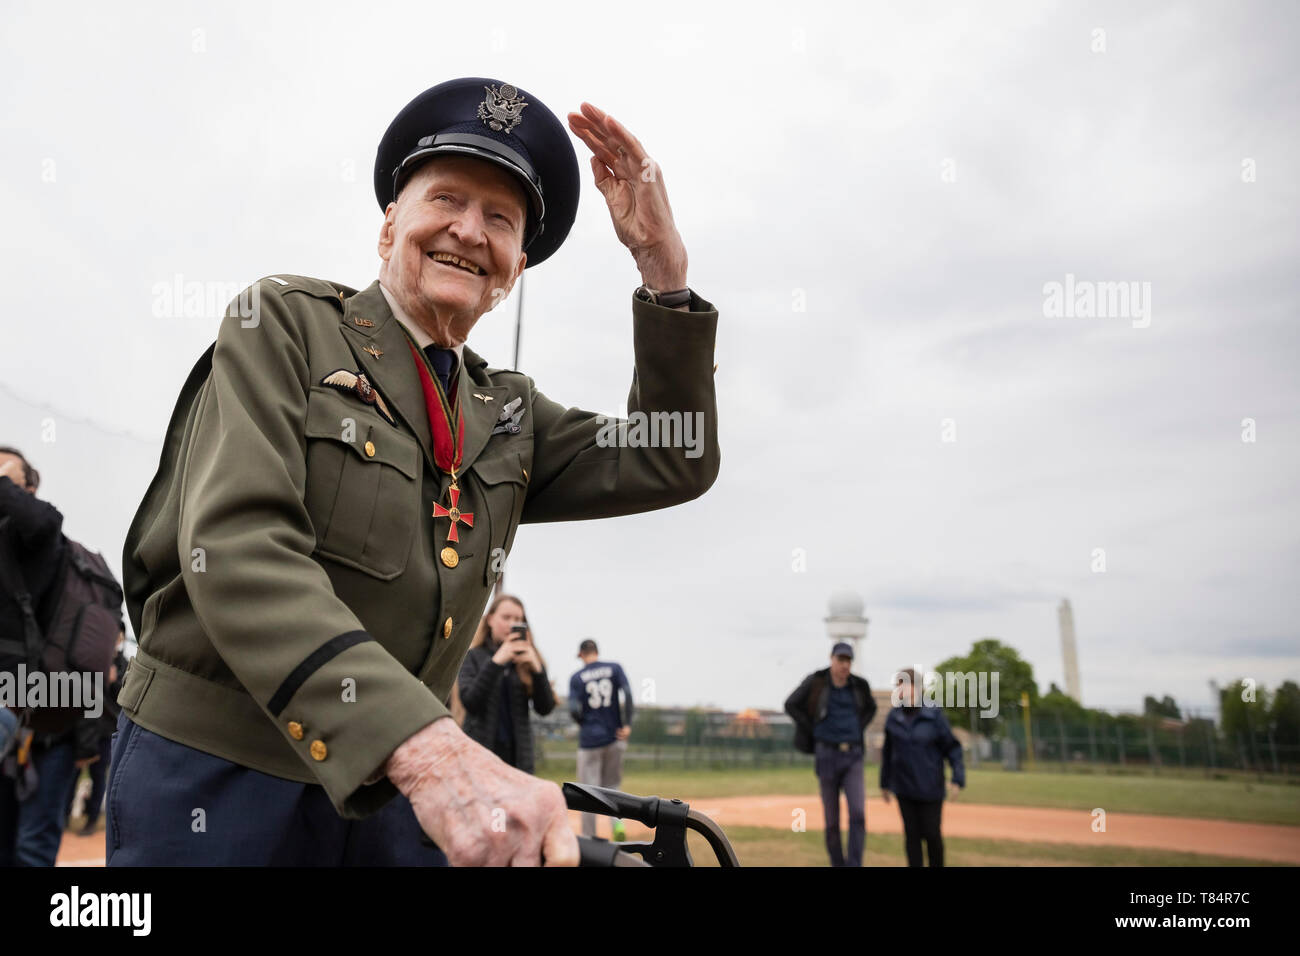 Berlin Braves High Resolution Stock Photography and Images - Alamy